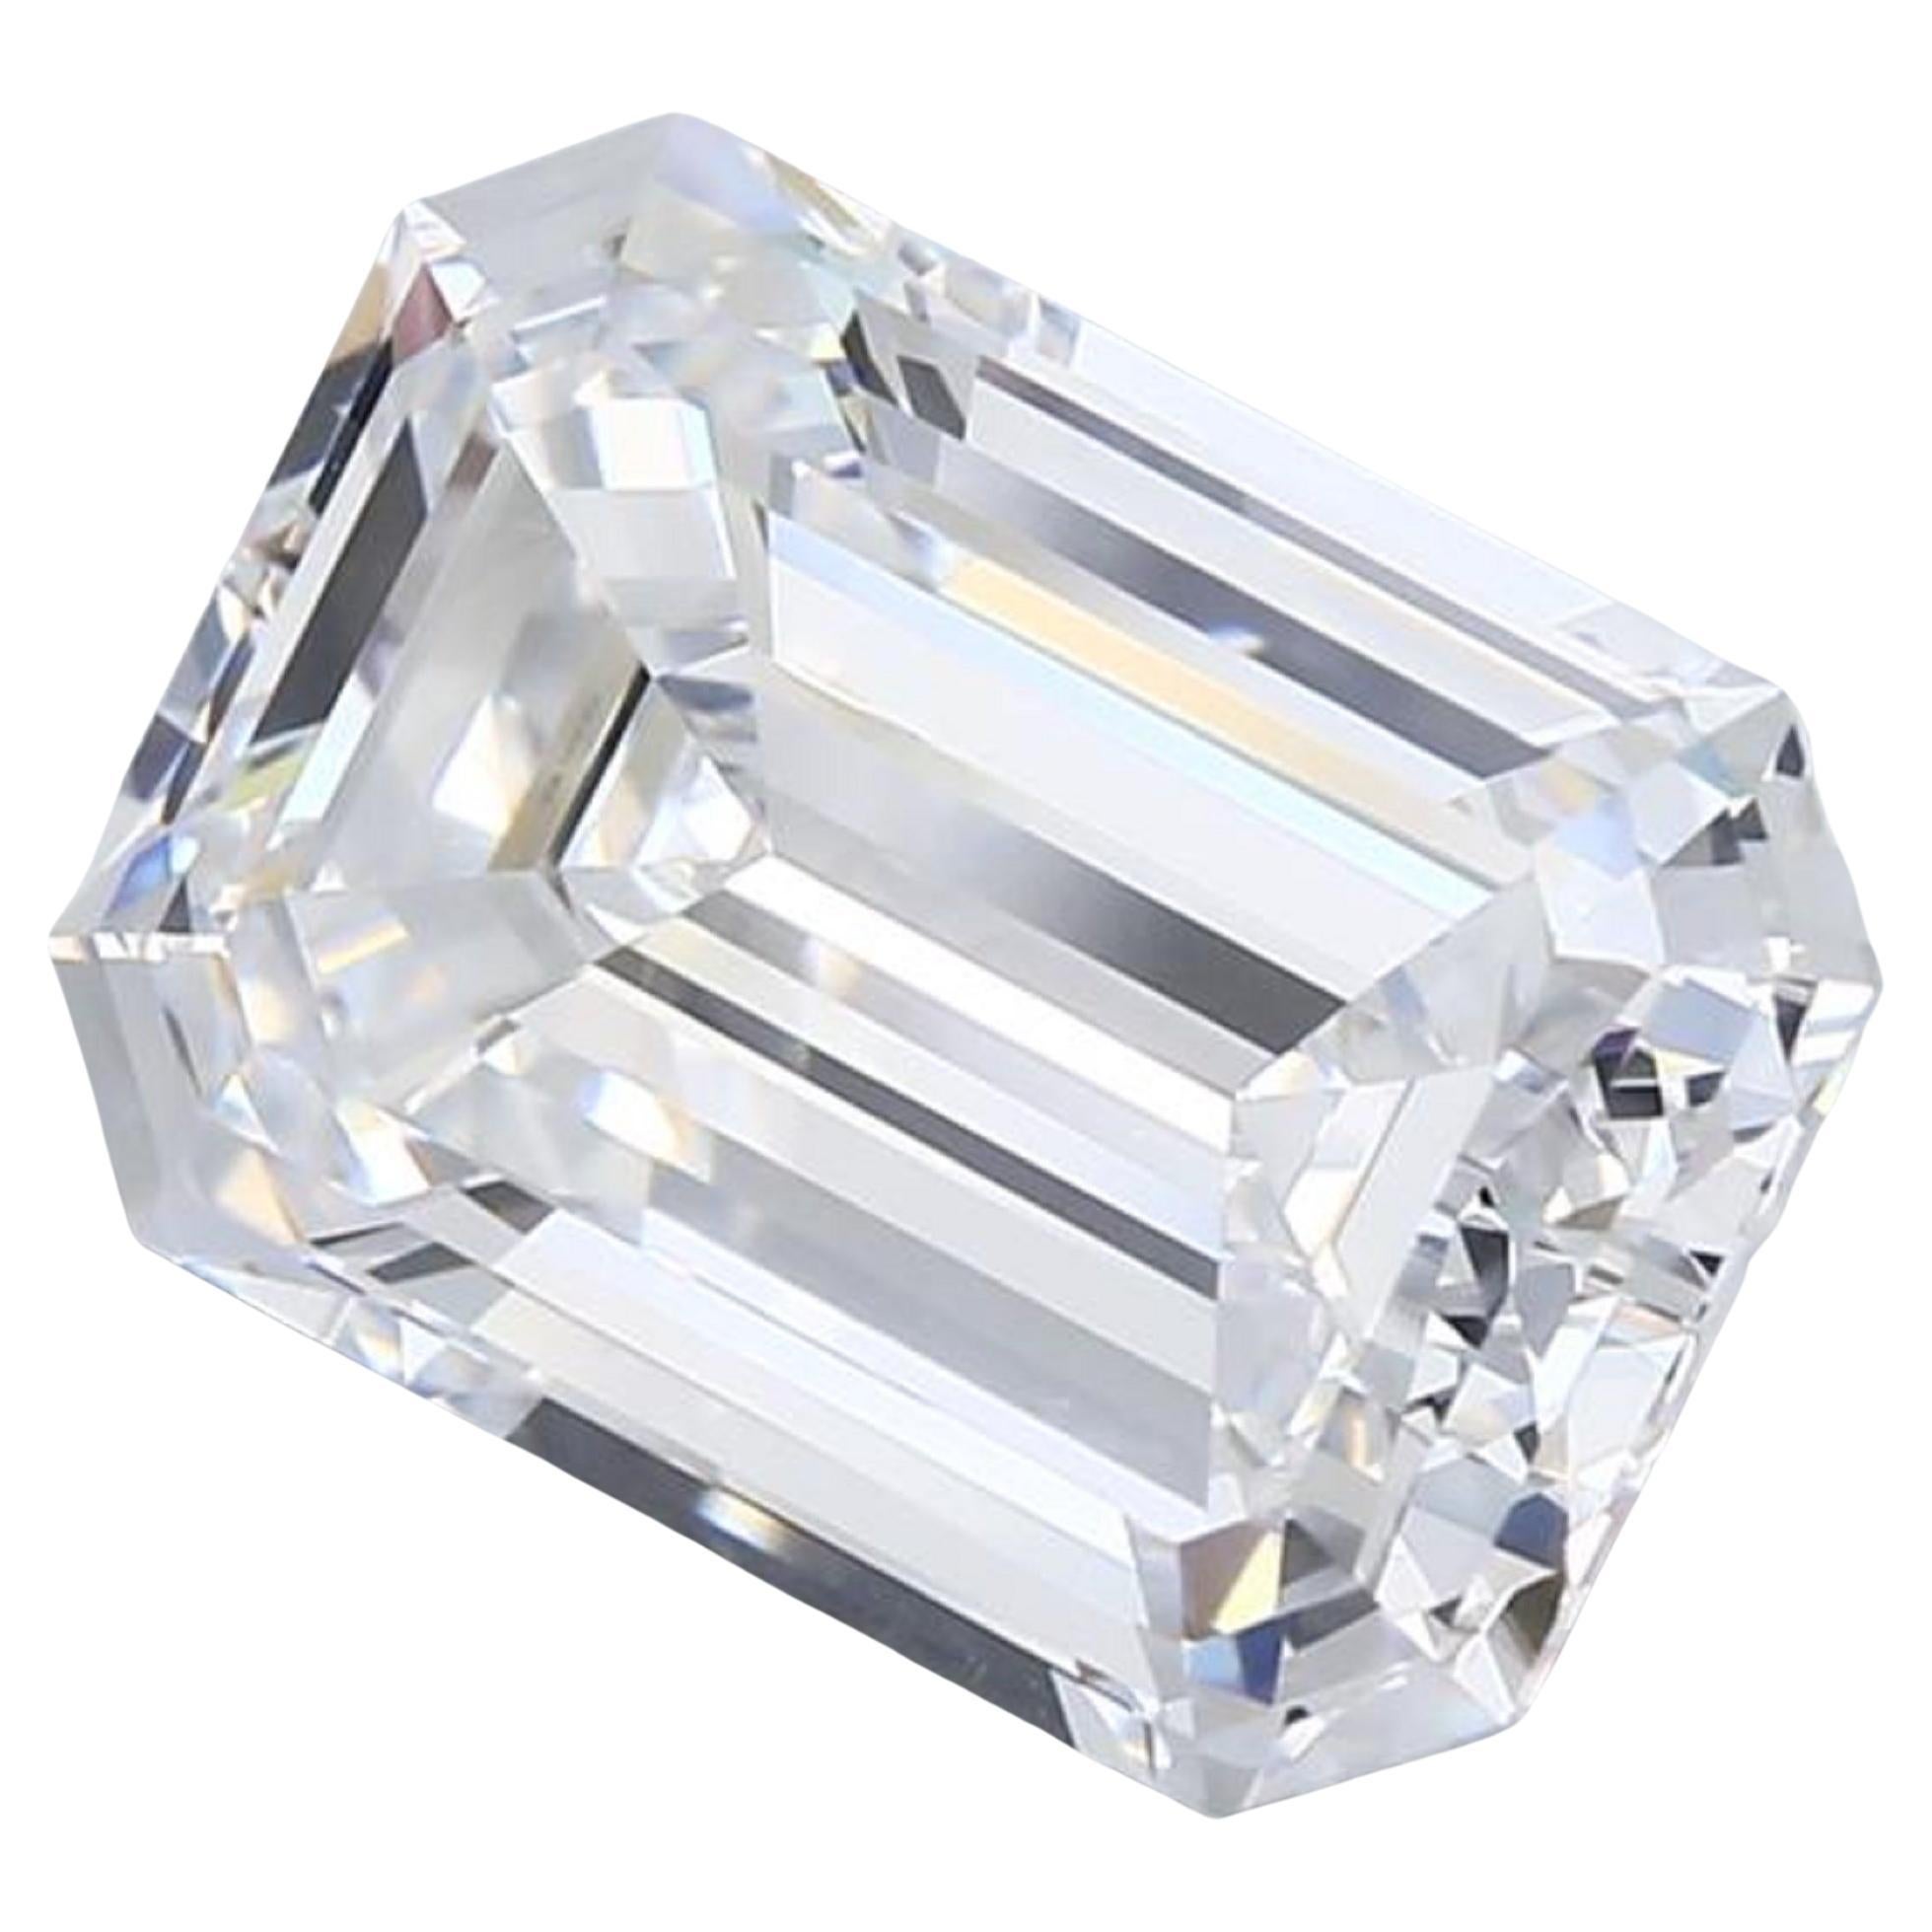 An investment grade emerald cut diamond certified by GIA
5.83 Carat
D Color 
Internally Flawless Clarity
None Fluorescence 
Excellent Polish 
Excellent Symmetry